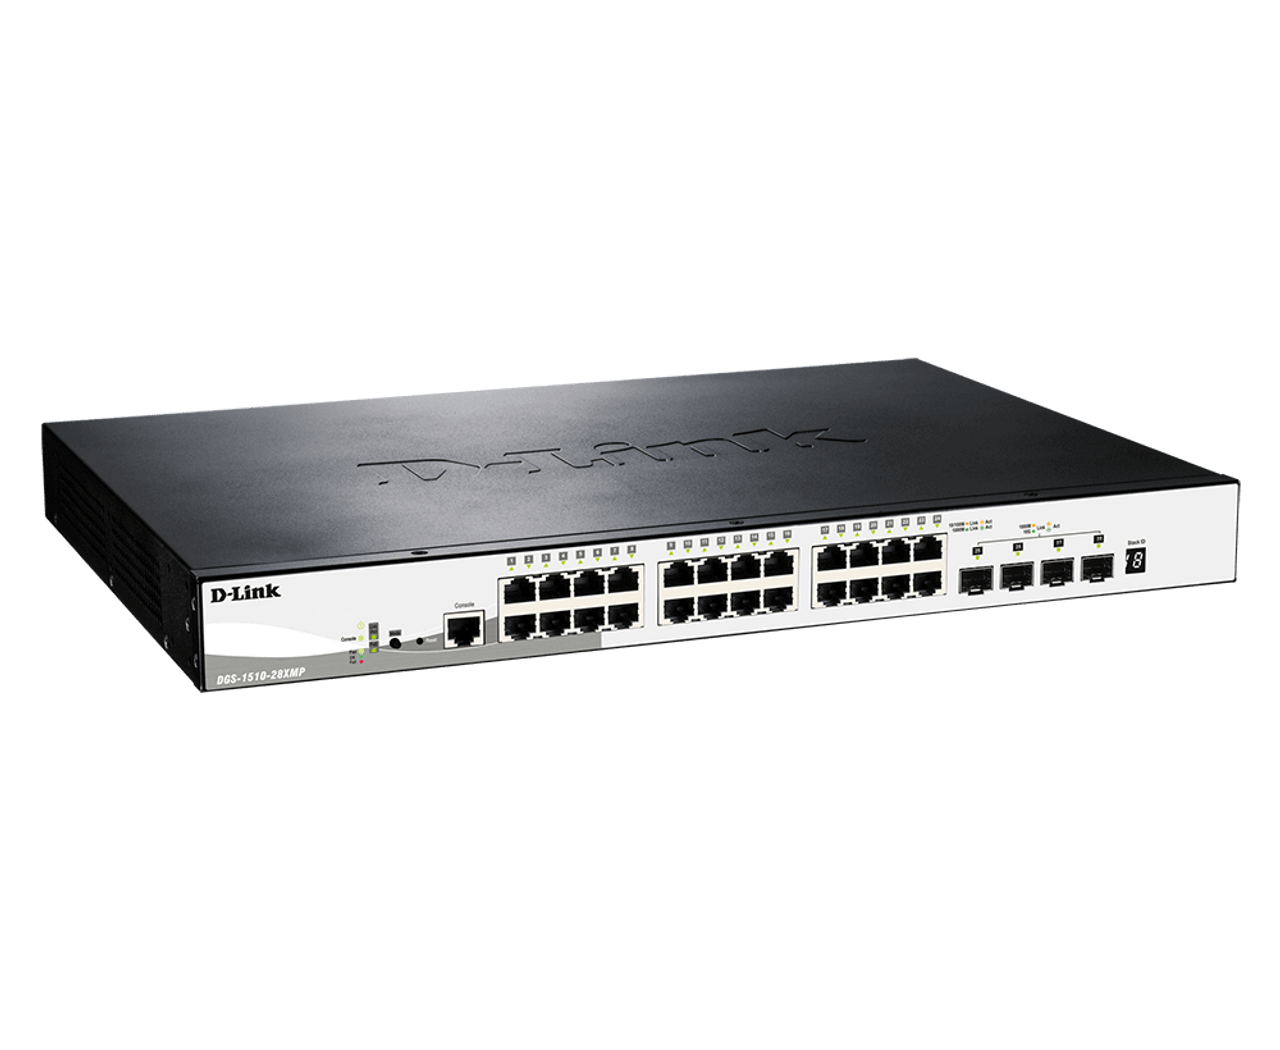 D-Link 24 Port Gigabit Stackable Smart Managed Switch w/ 4 10GbE